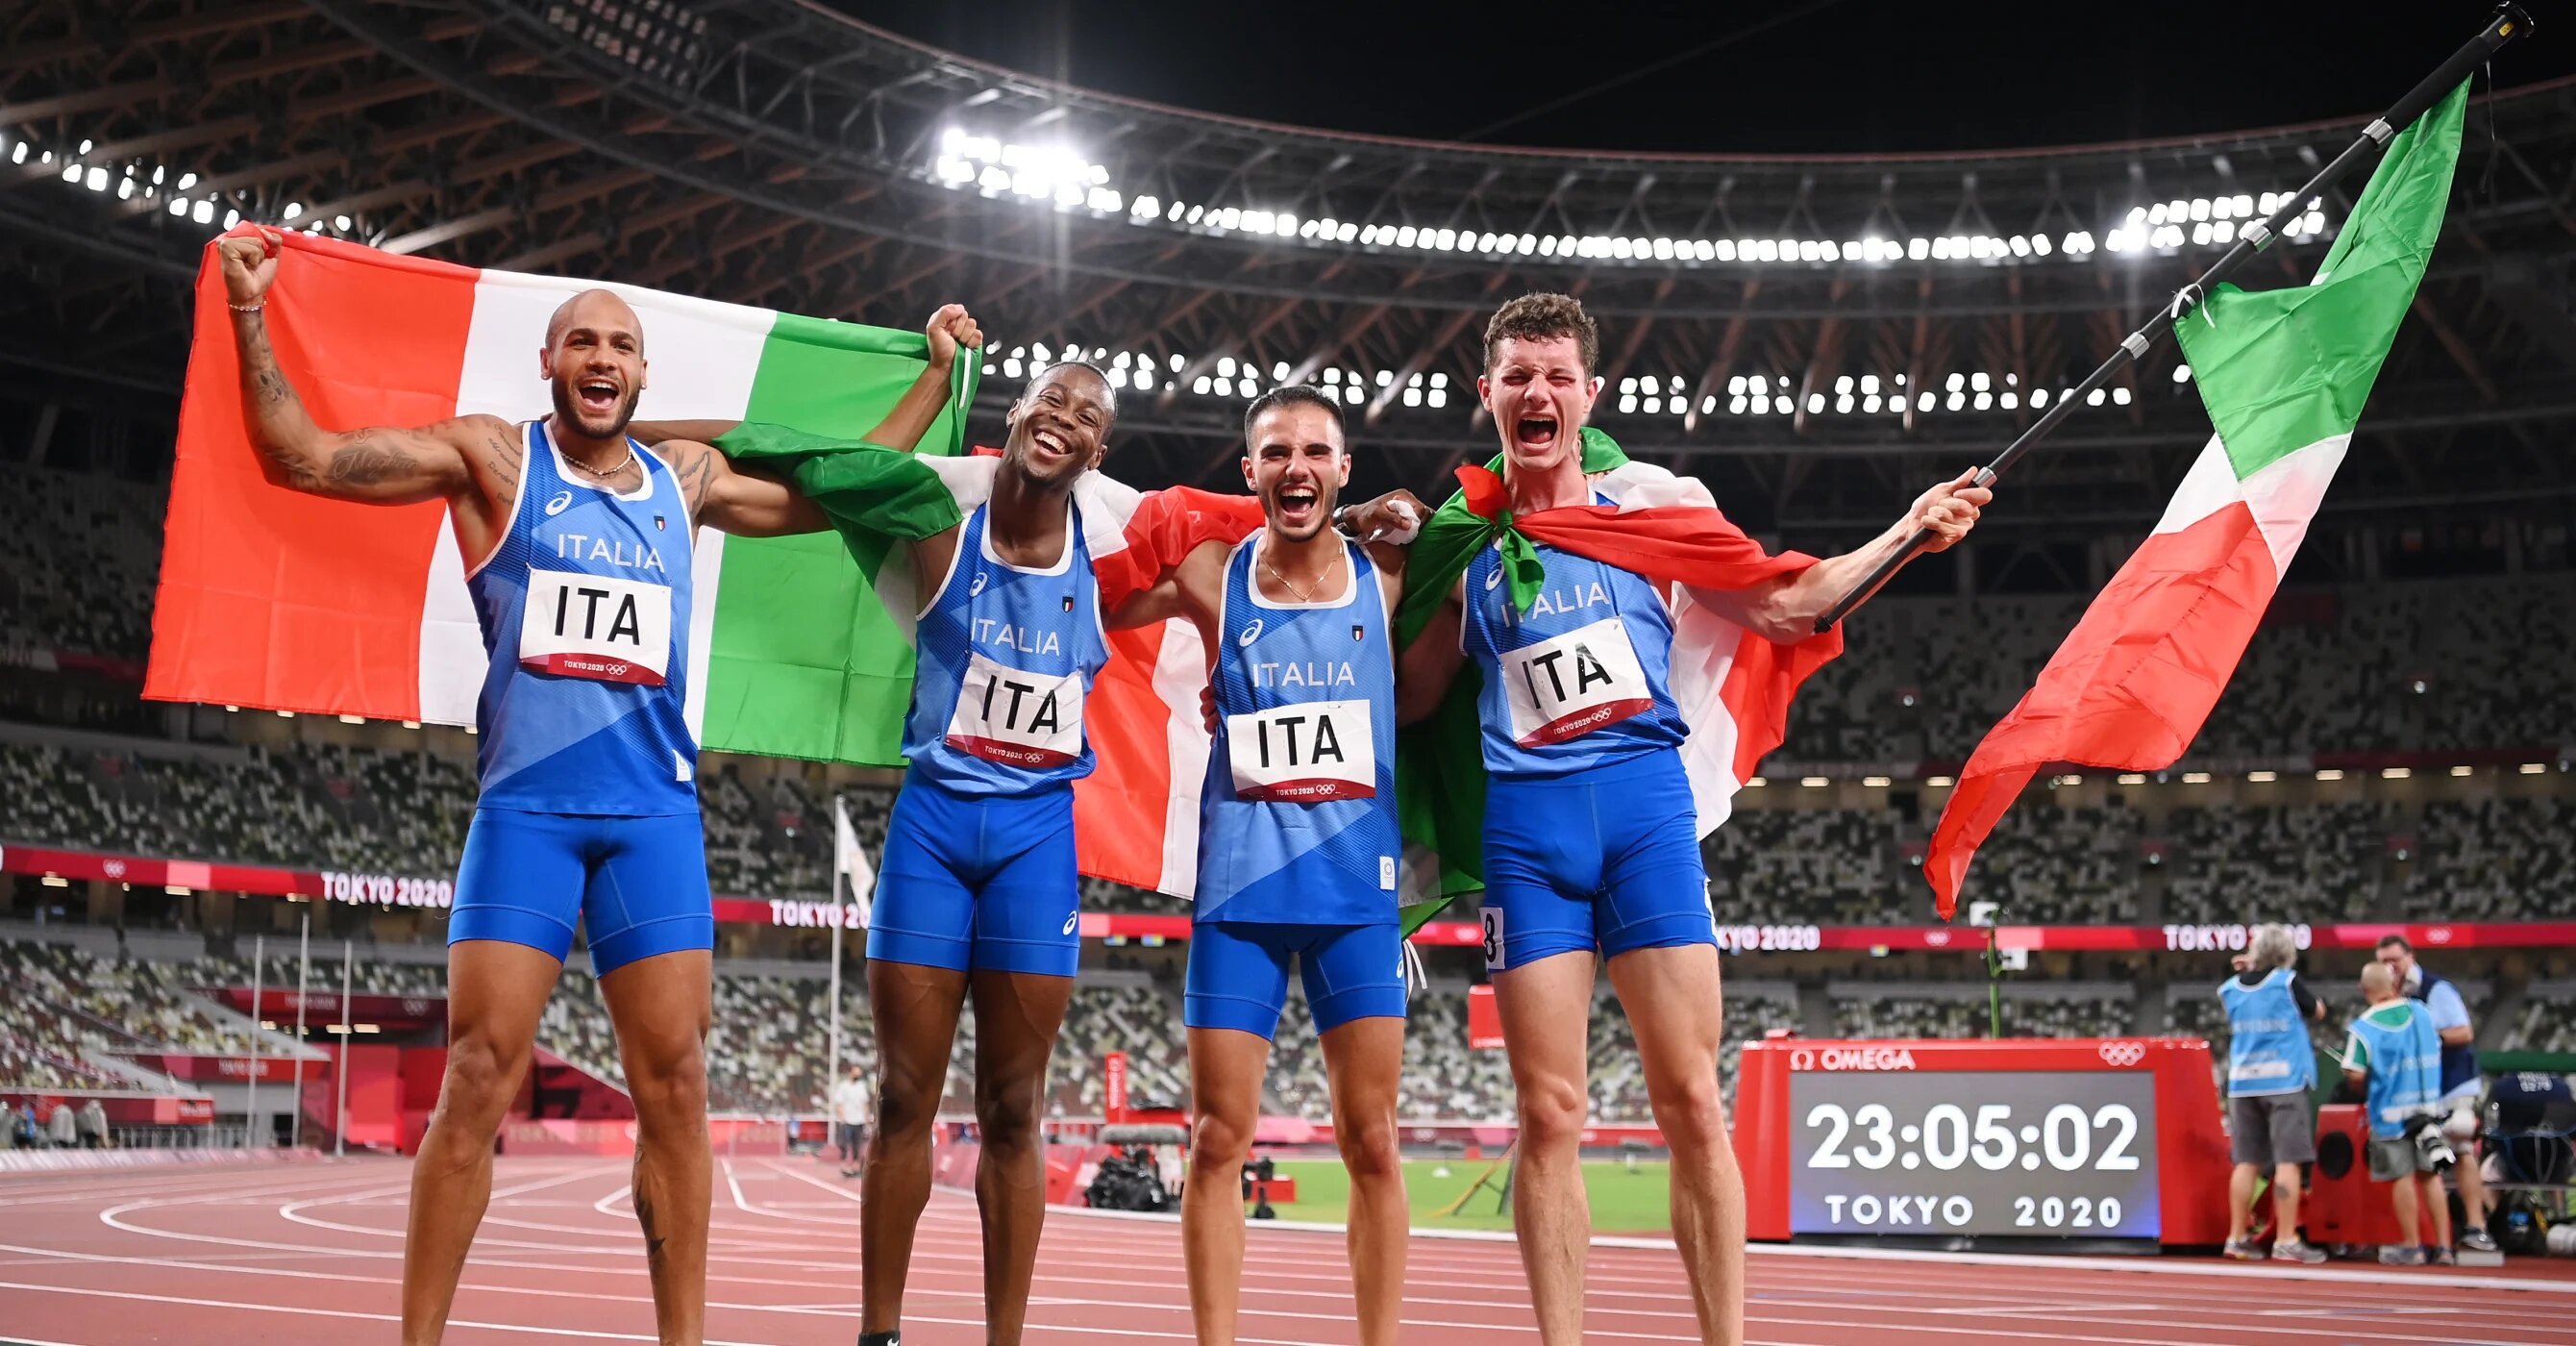 TOKYO, JAPAN - AUGUST 06: Lorenzo Patta, Lamont Marcell Jacobs, Eseosa Fostine Desalu and Filippo Tortu of Team Italy celebrate winning the gold medal in the Men's 4 x 100m Relay Final on day fourteen of the Tokyo 2020 Olympic Games at Olympic Stadium on August 06, 2021 in Tokyo, Japan. (Photo by Matthias Hangst/Getty Images) 2021 Getty Images